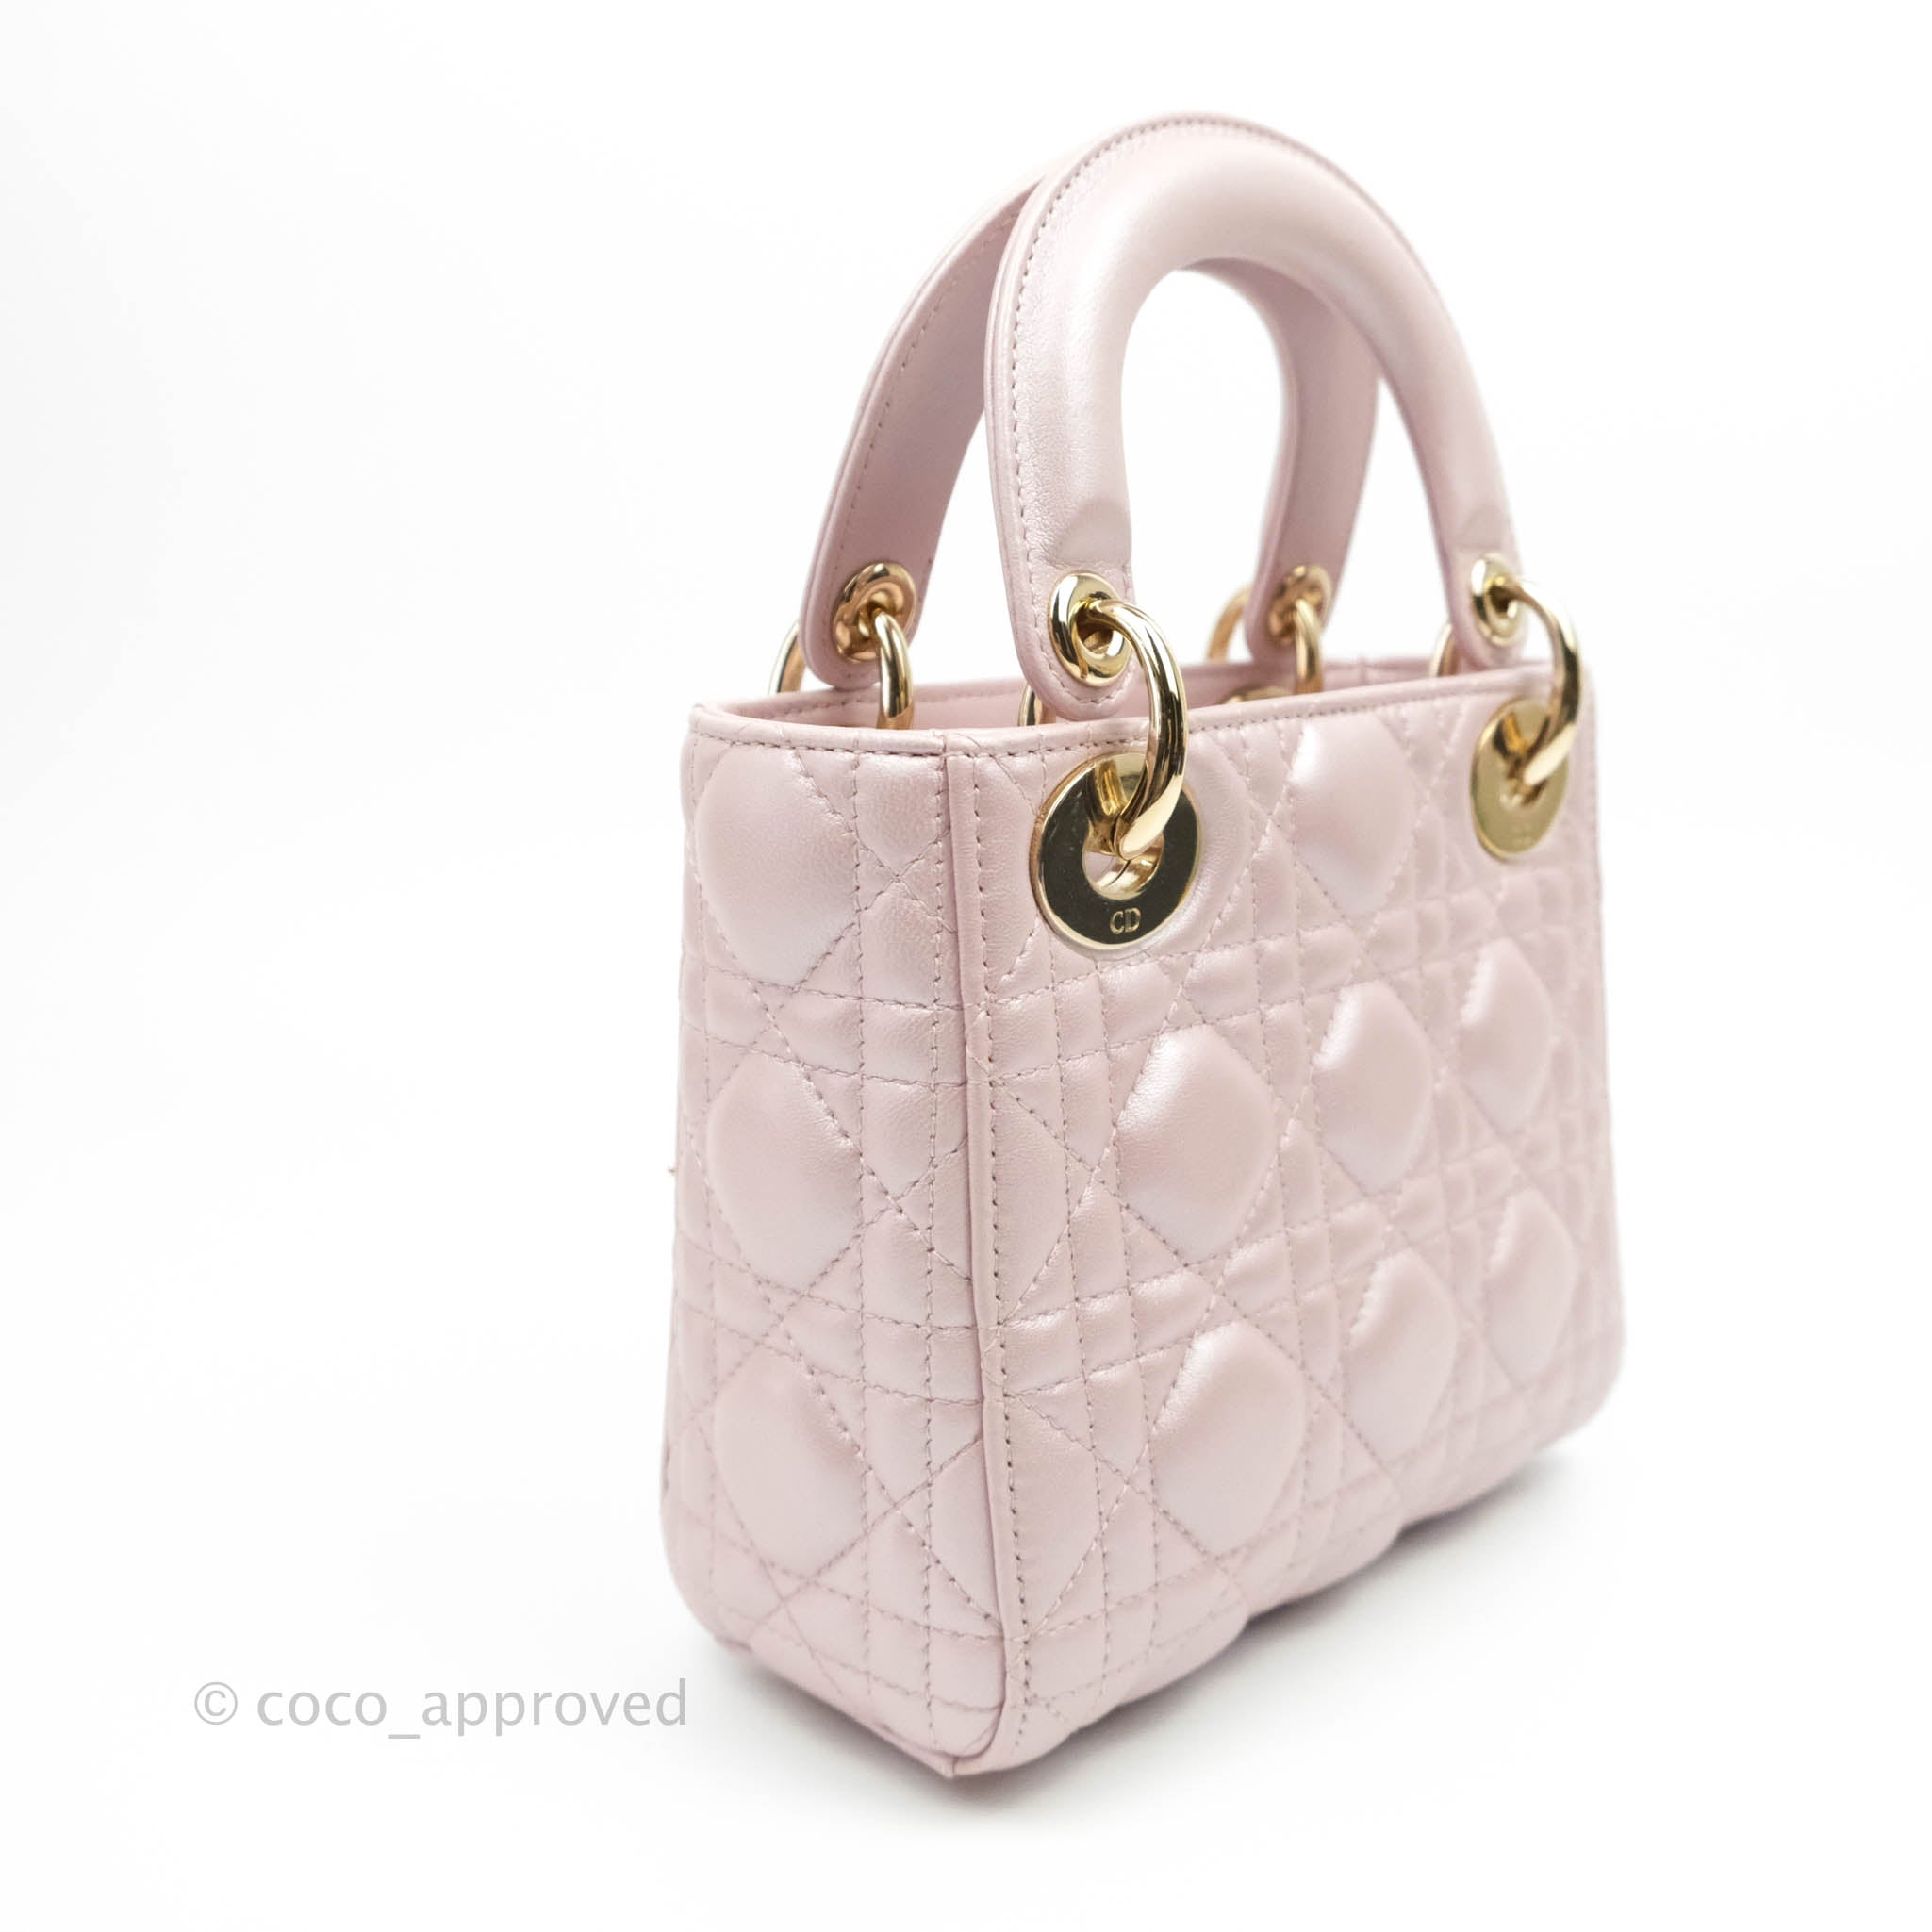 Lady Dior Milly Mini Bag Antique Pink Cannage Lambskin